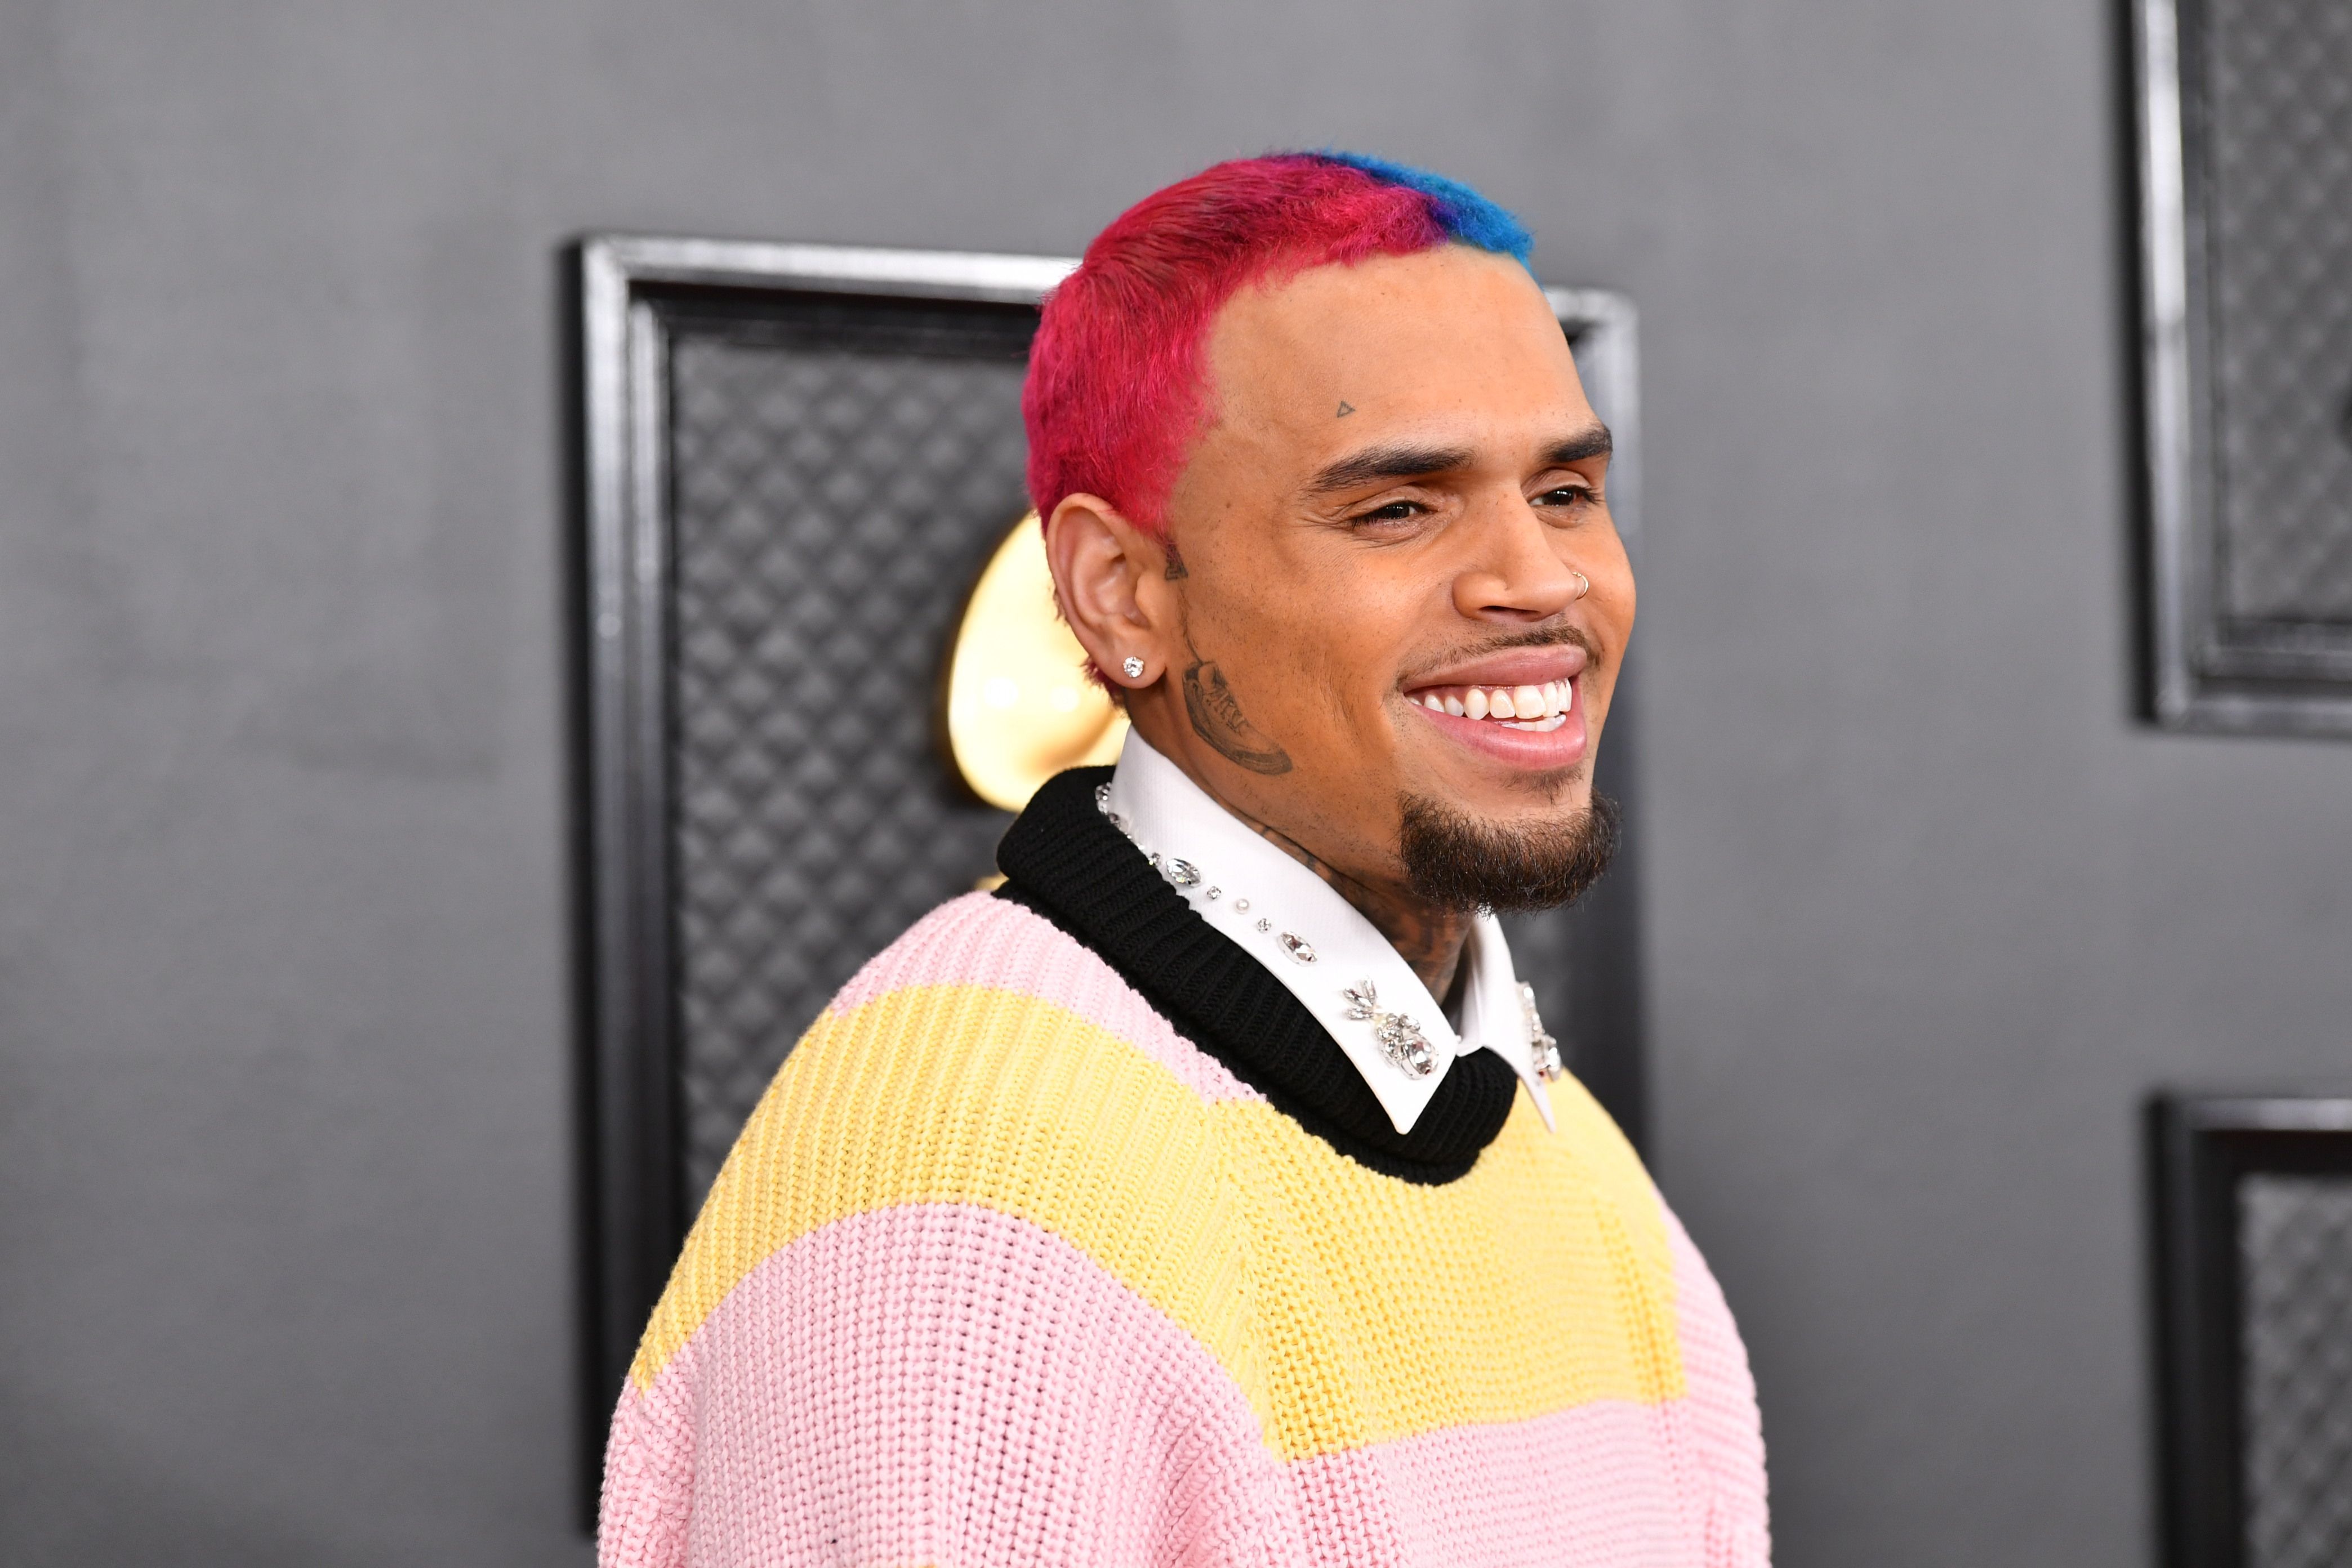 R&B singer Chris Brown attends the 62nd Annual Grammy Awards at Staples Center on January 26, 2020 in Los Angeles, California | Photo: Getty Images